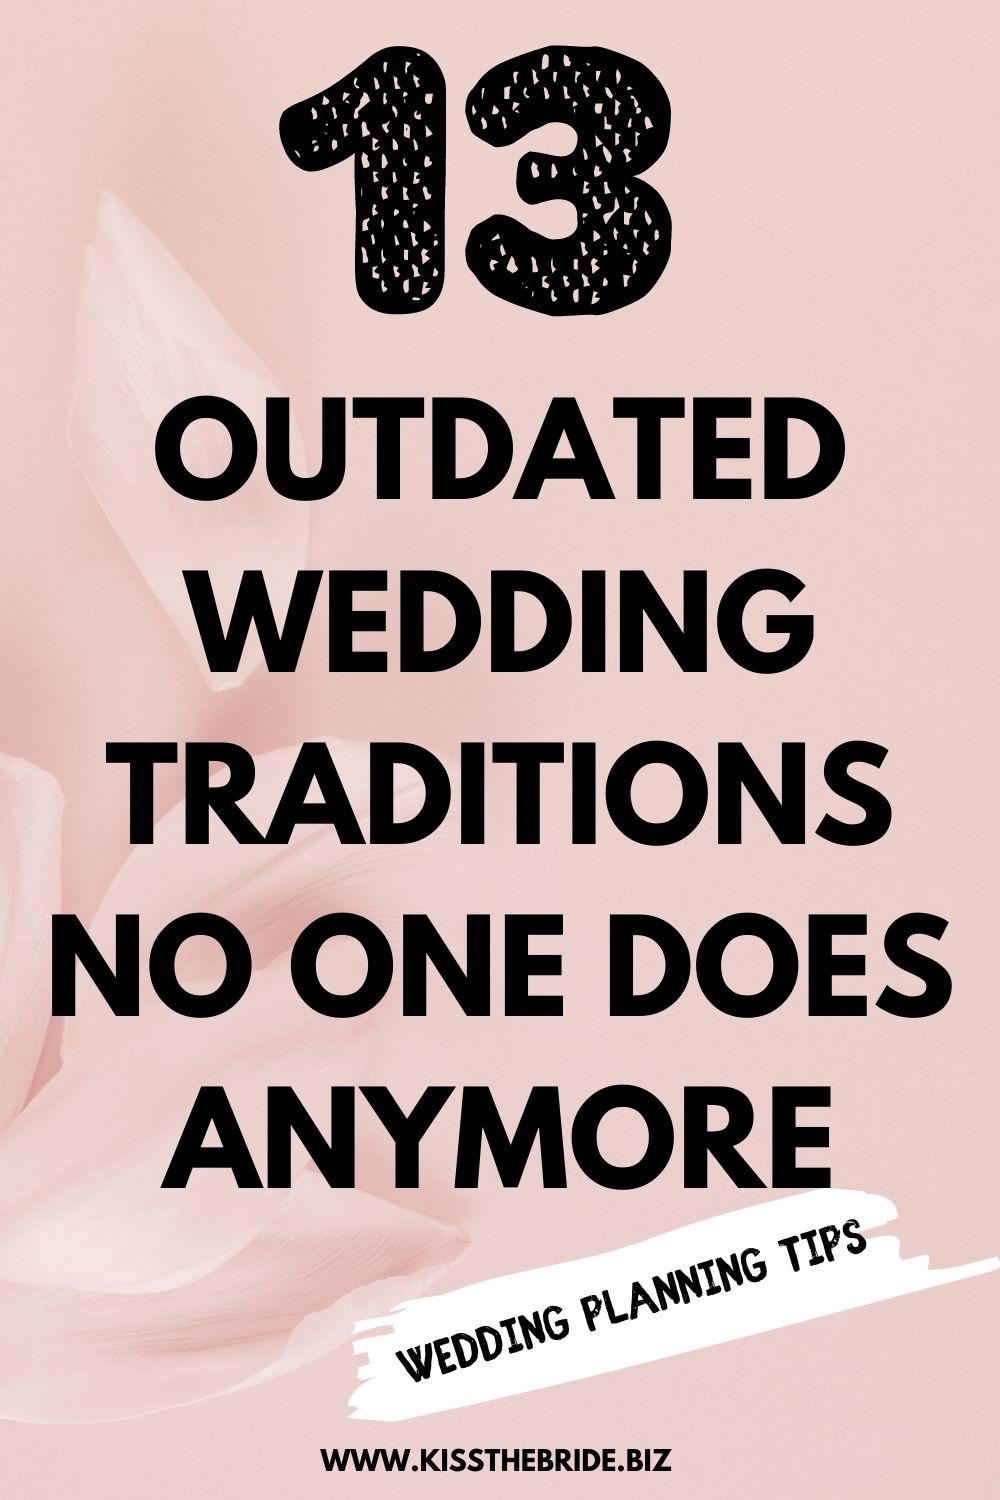 13 Outdated Wedding Traditions you need to know about